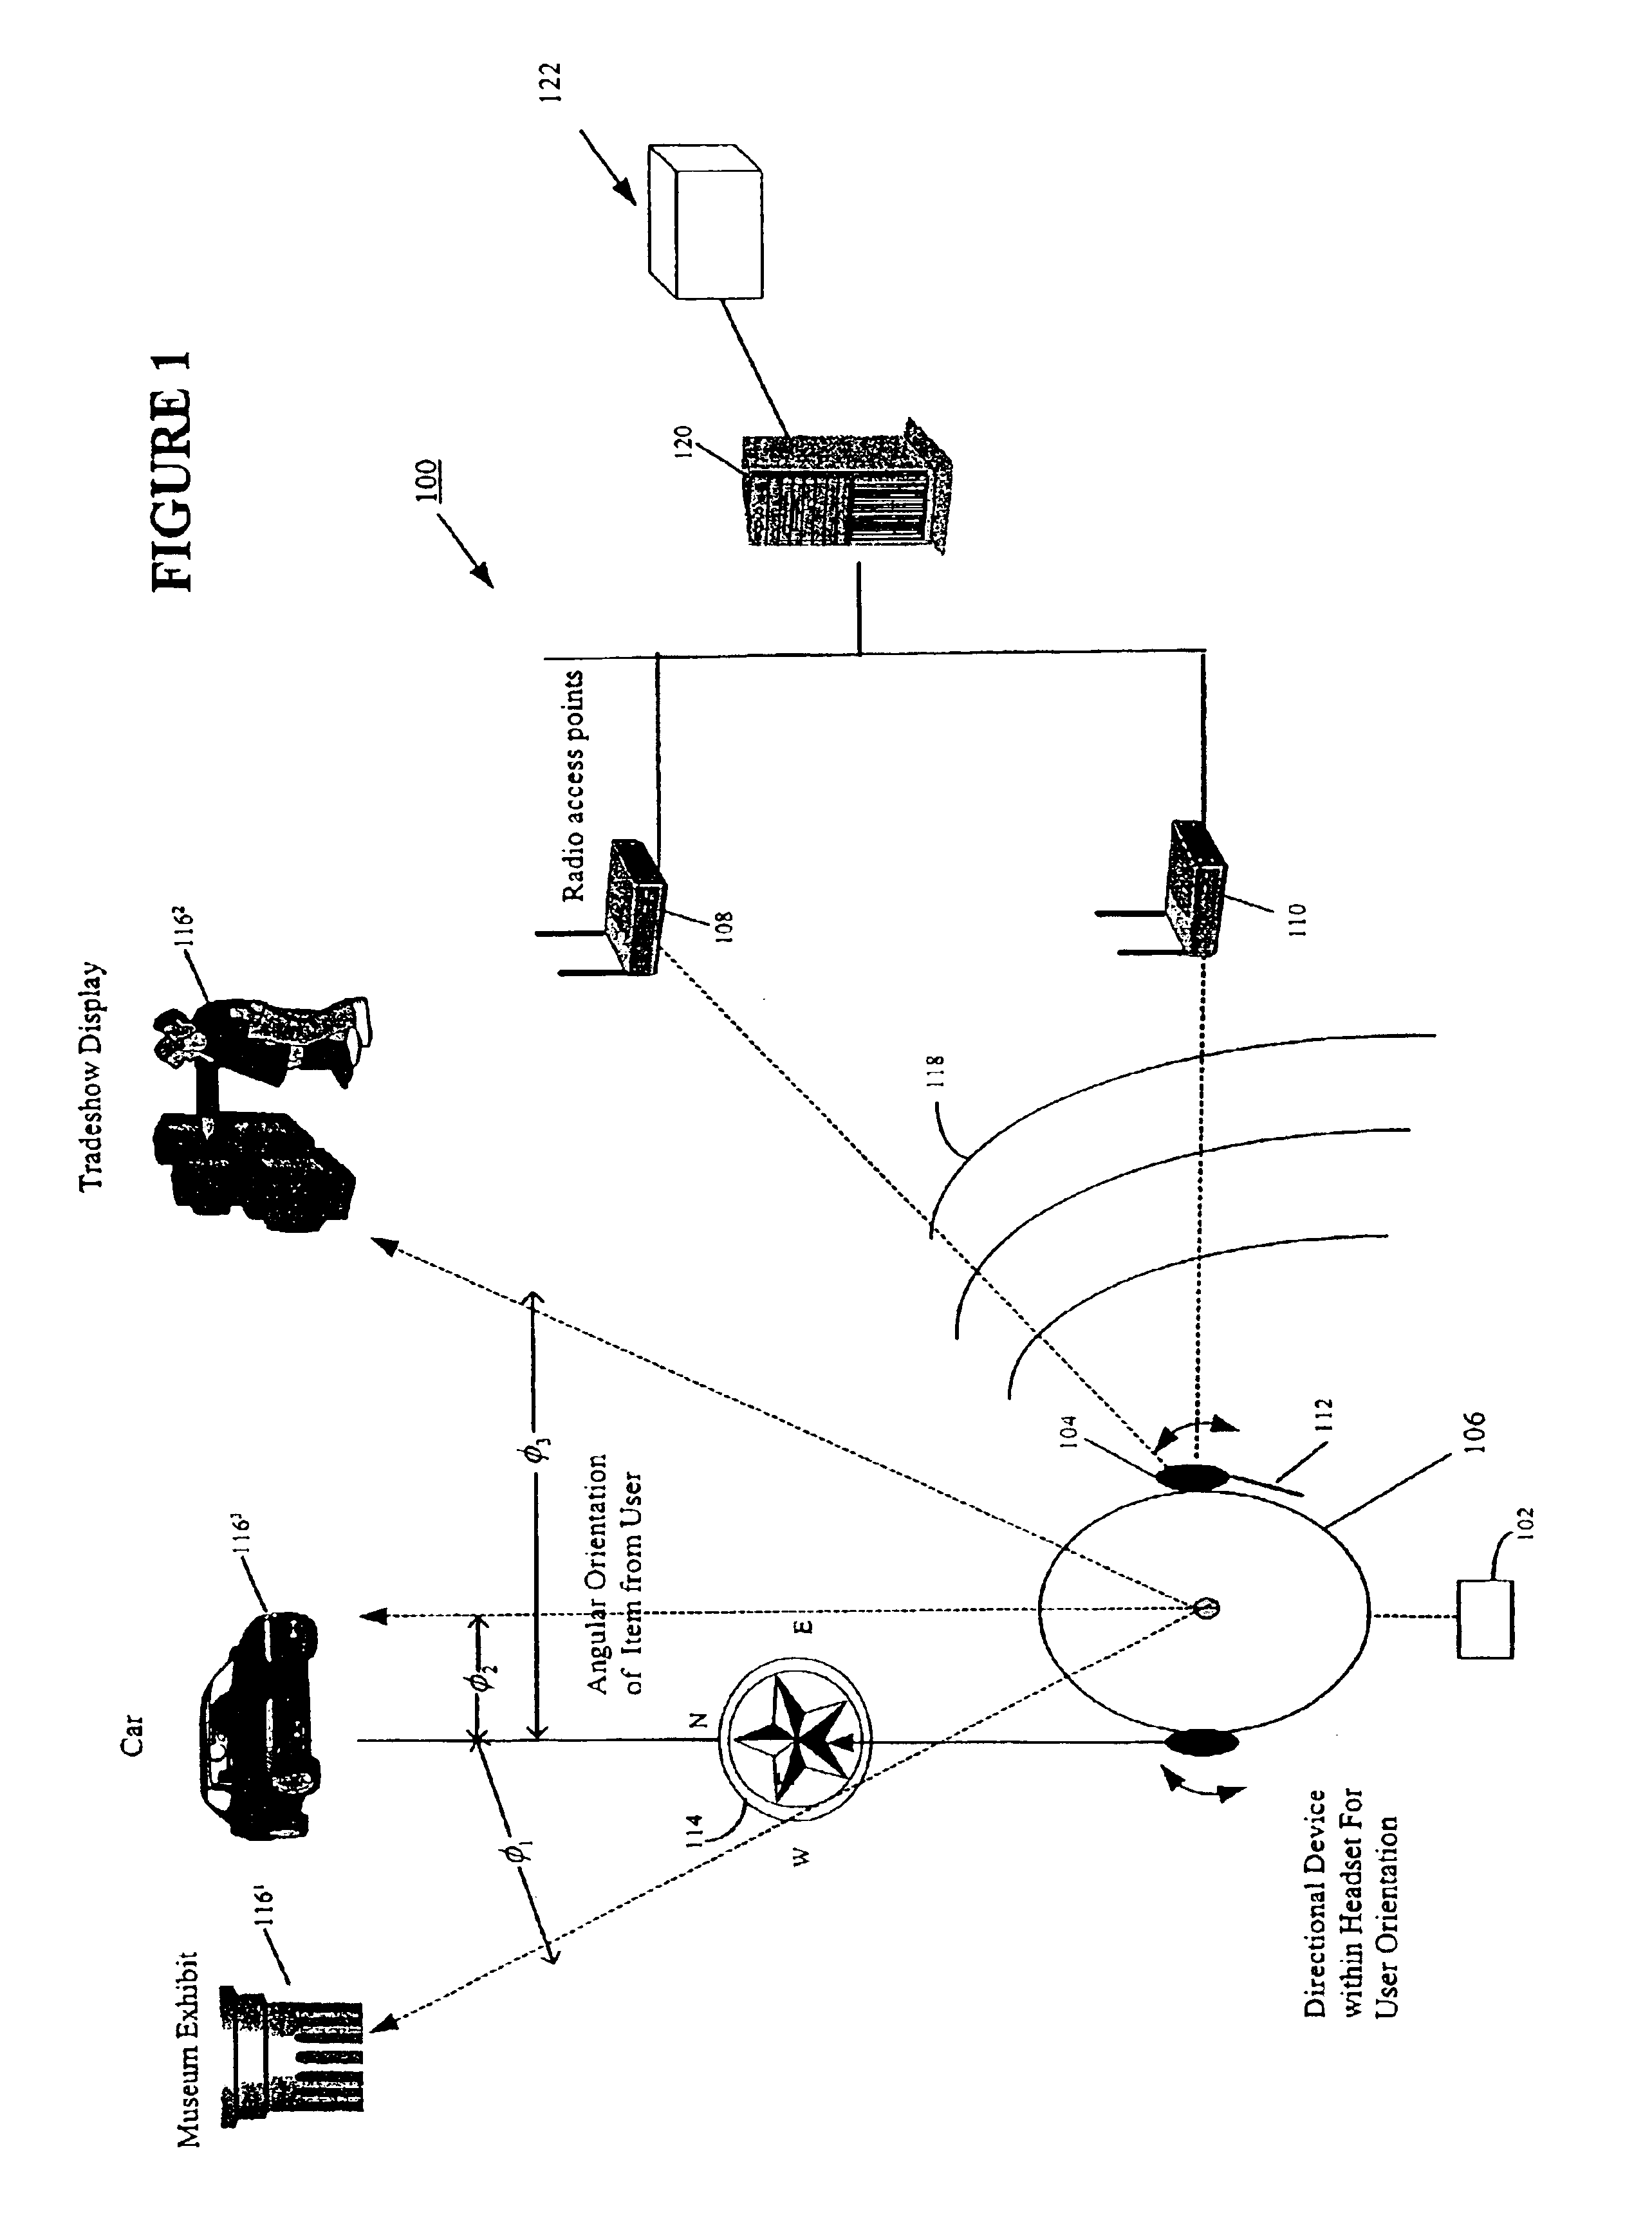 Telemetric contextually based spatial audio system integrated into a mobile terminal wireless system